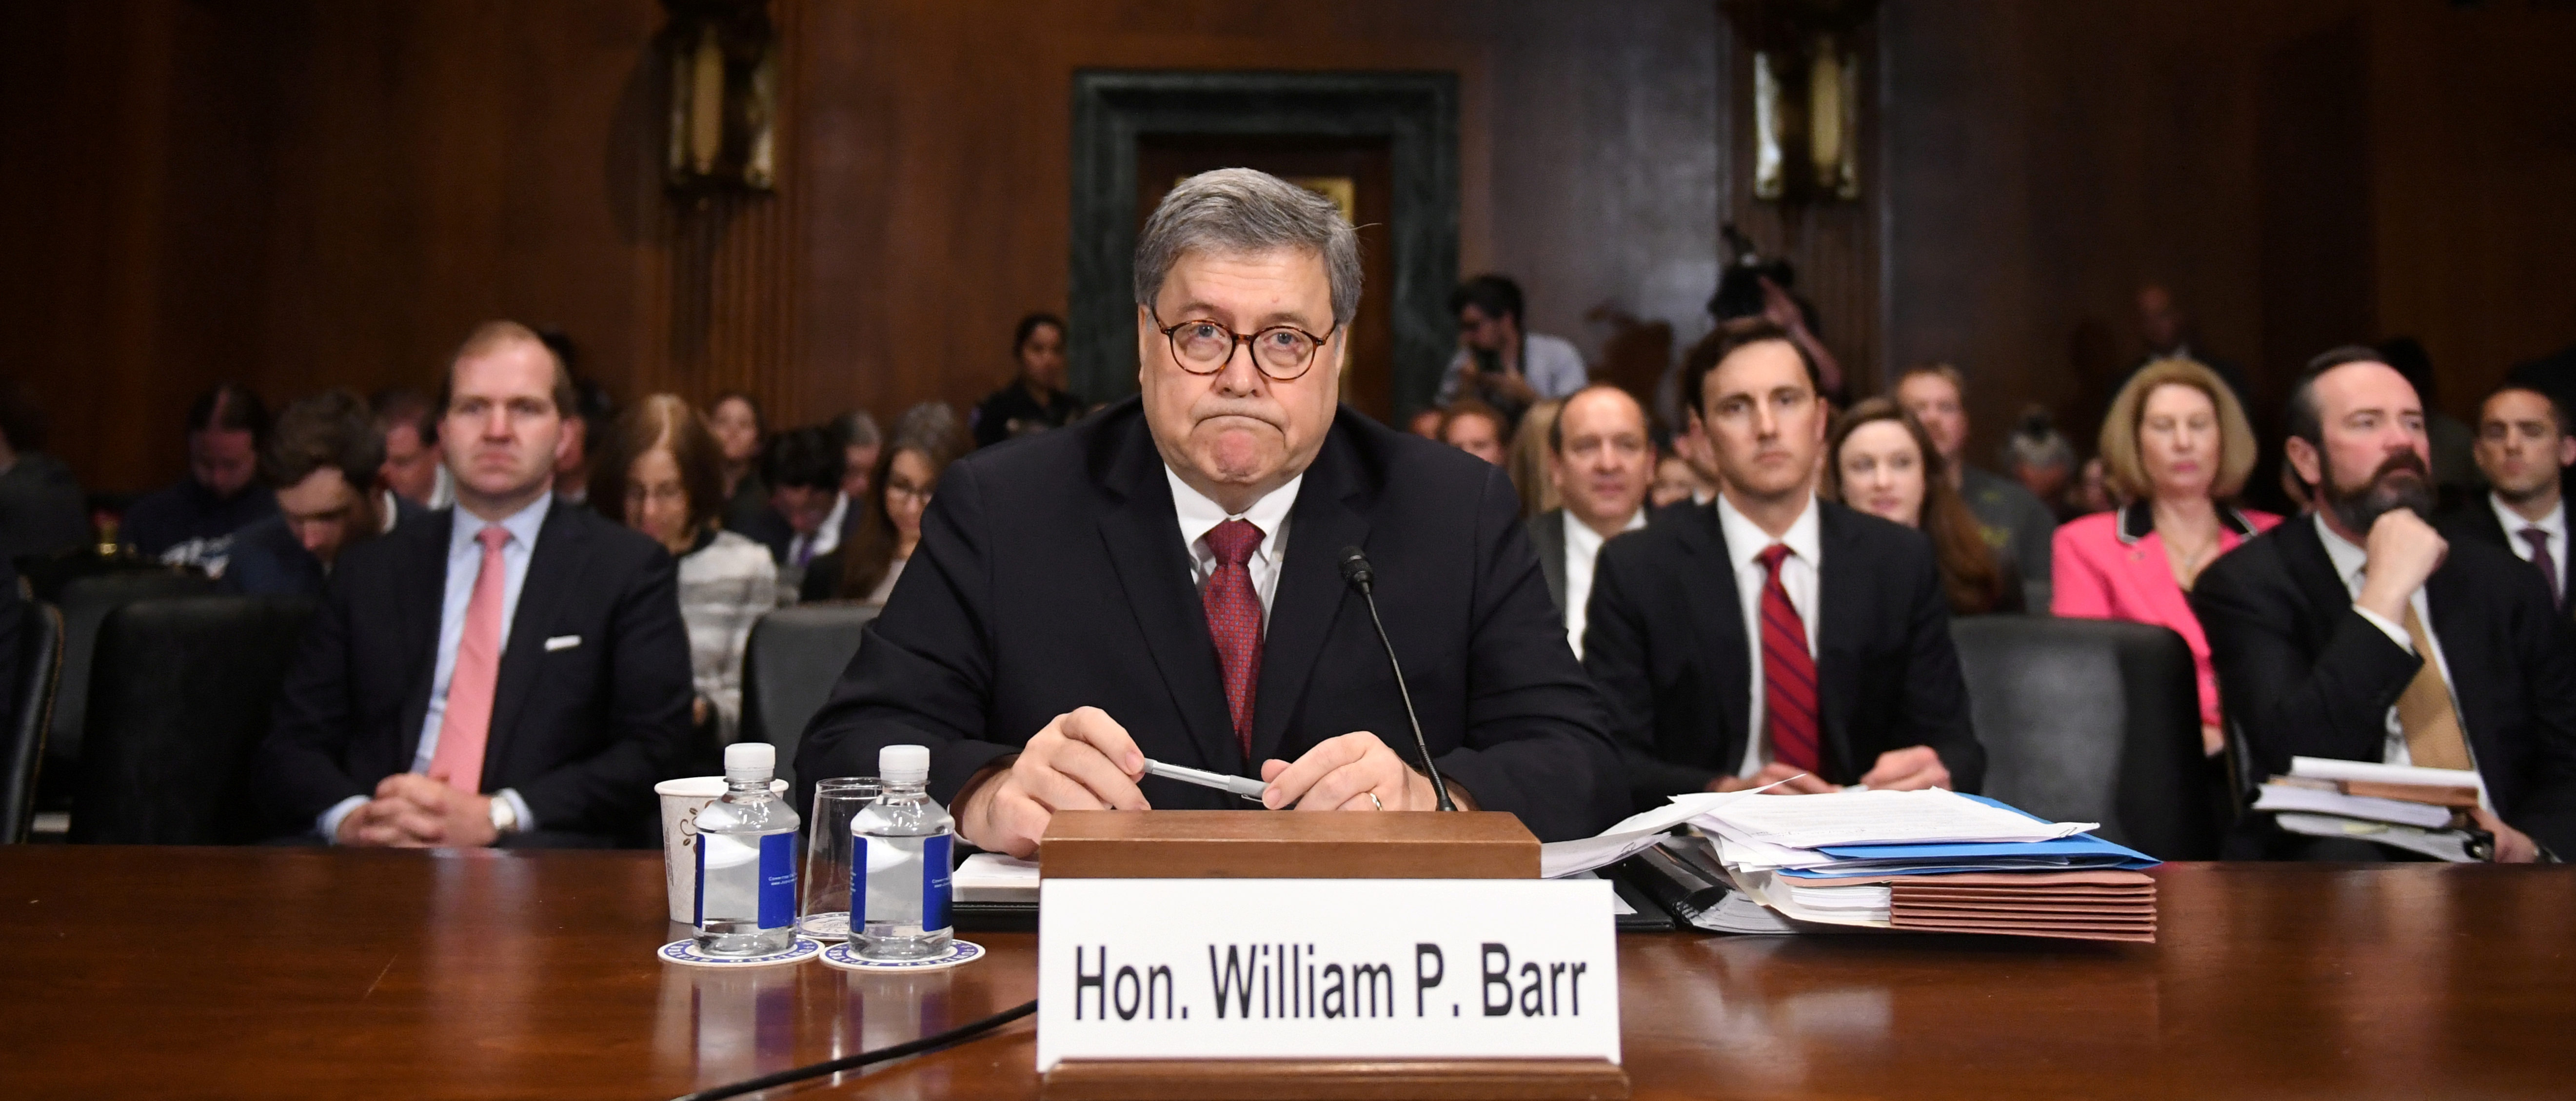 U.S. Attorney General William Barr testifies before a Senate Judiciary Committee hearing on "The Justice Department's investigation of Russian interference with the 2016 presidential election" on Capitol Hill in Washington, D.C., U.S., May 1, 2019. REUTERS/Clodagh Kilcoyne